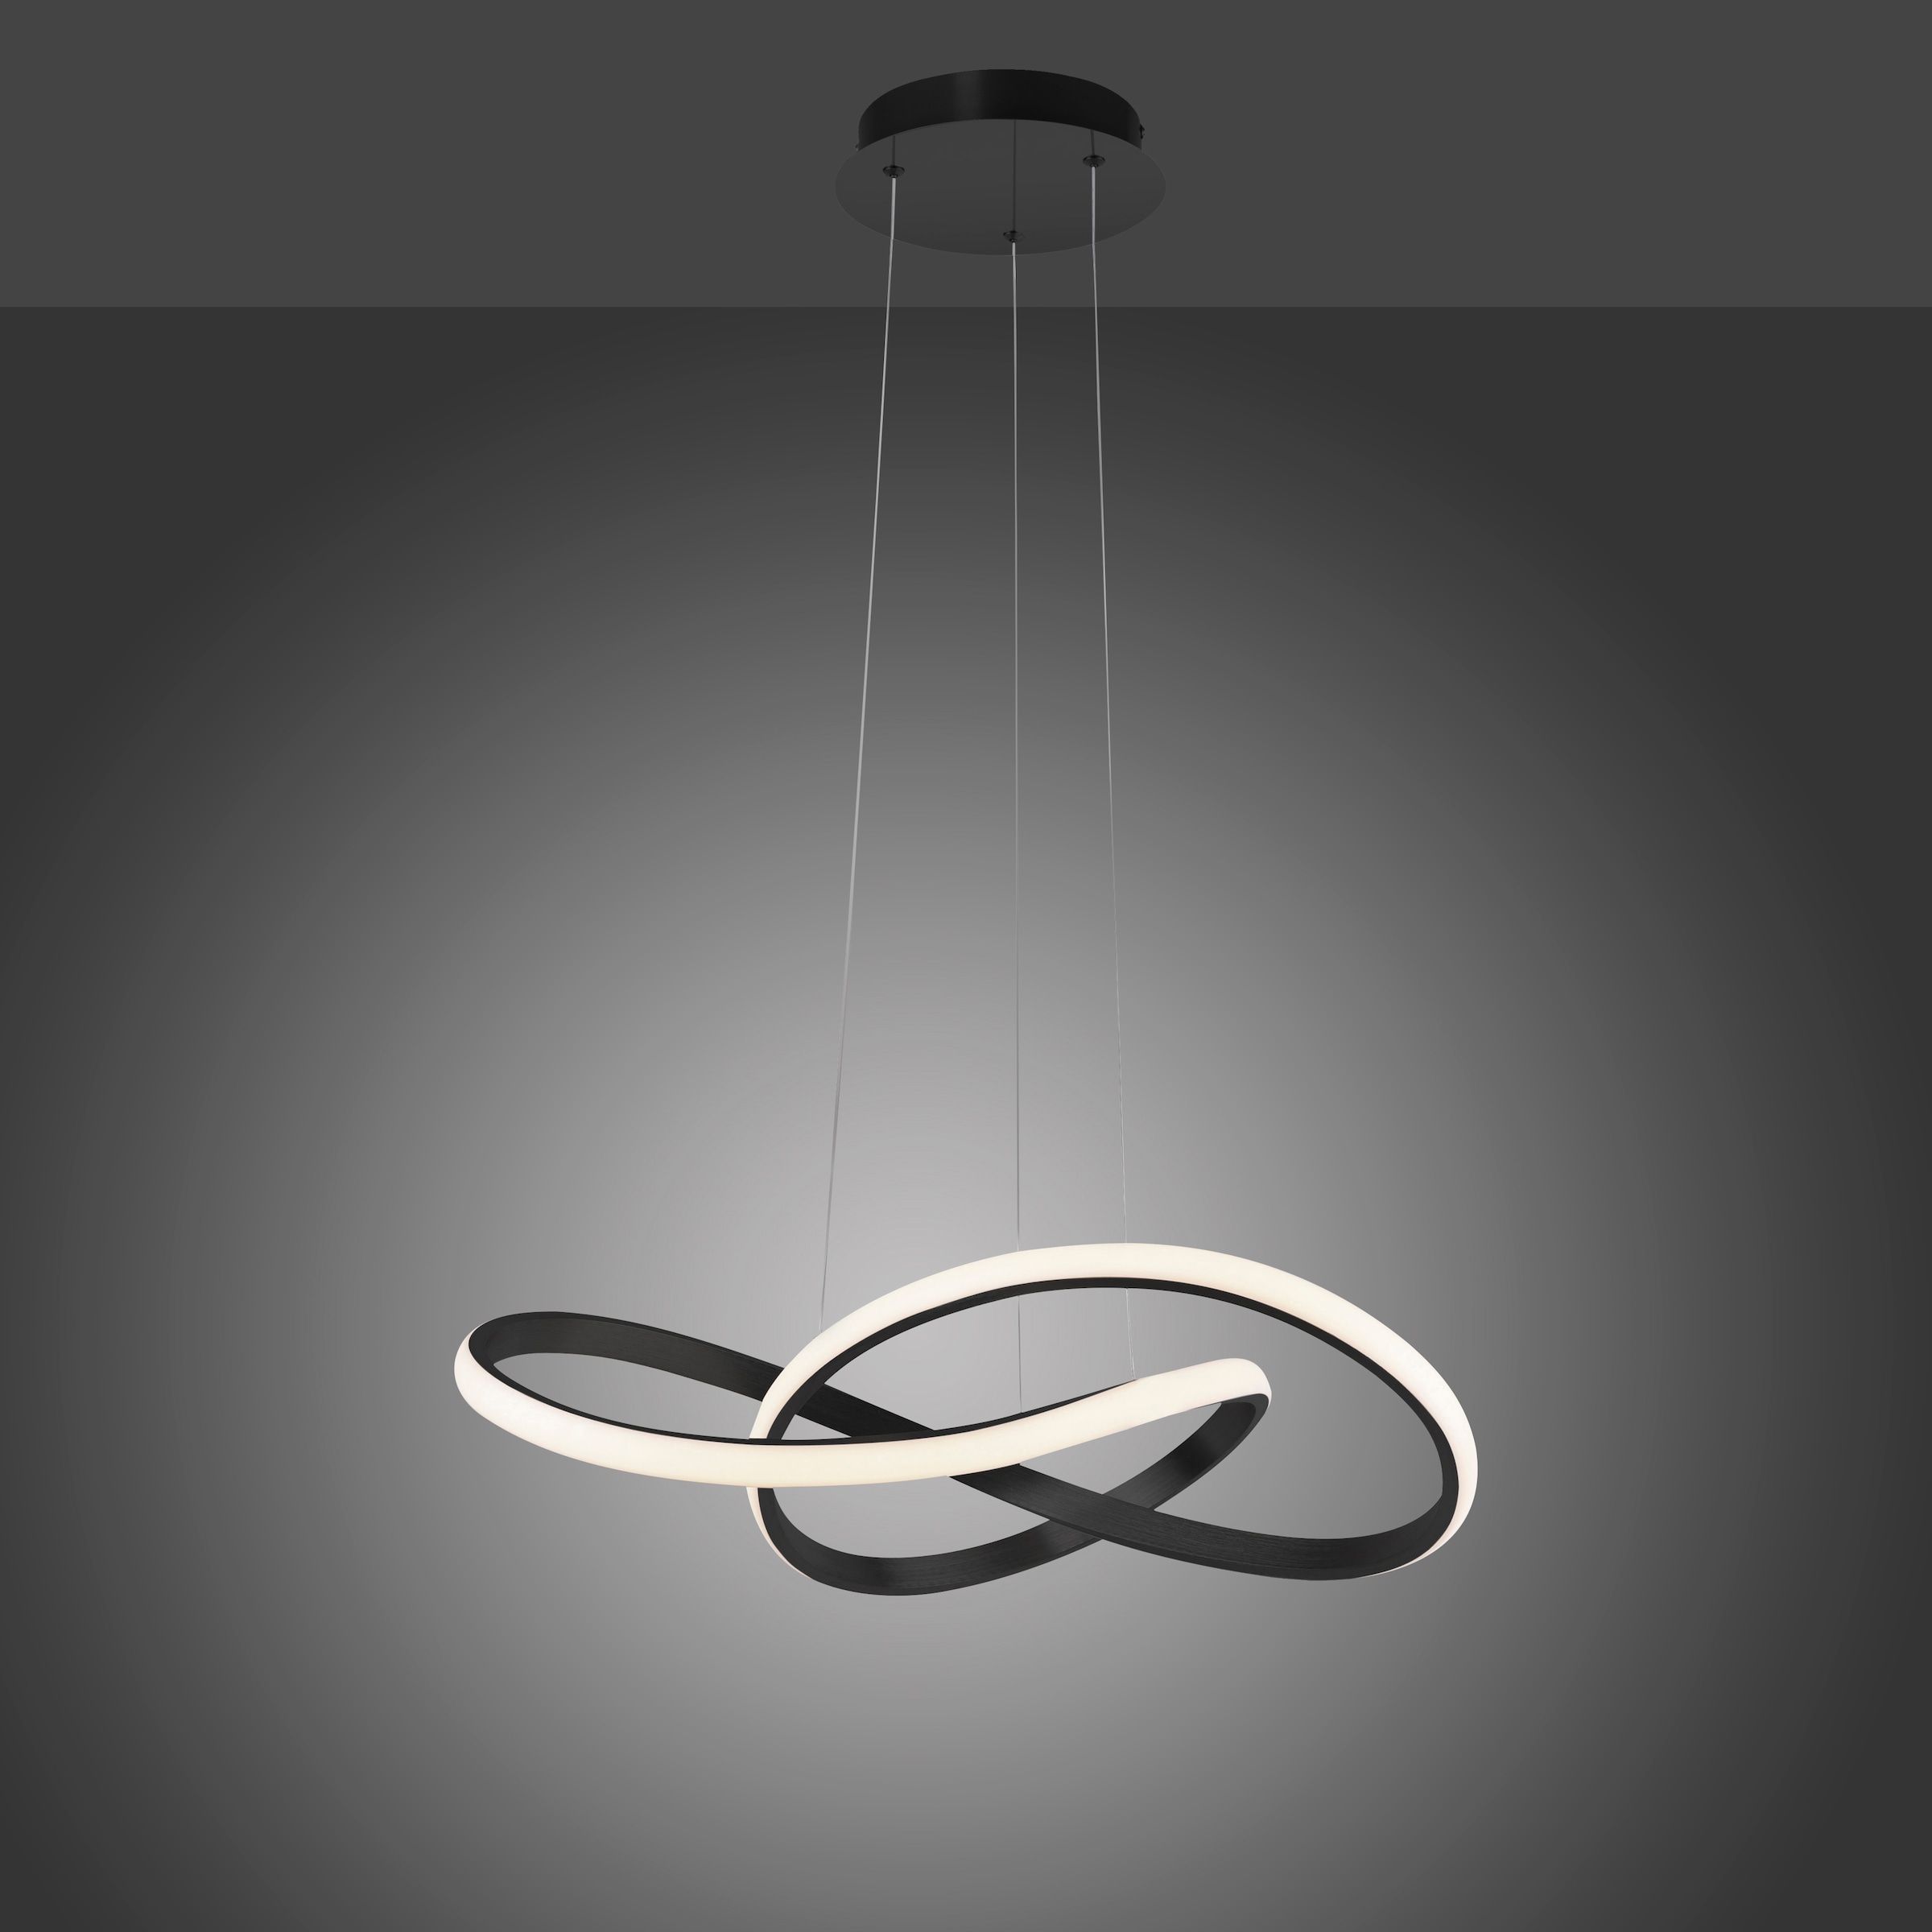 JUST LIGHT Pendelleuchte »MARIA«, 1 flammig-flammig, LED, dimmbar, Switchmo  online bei OTTO